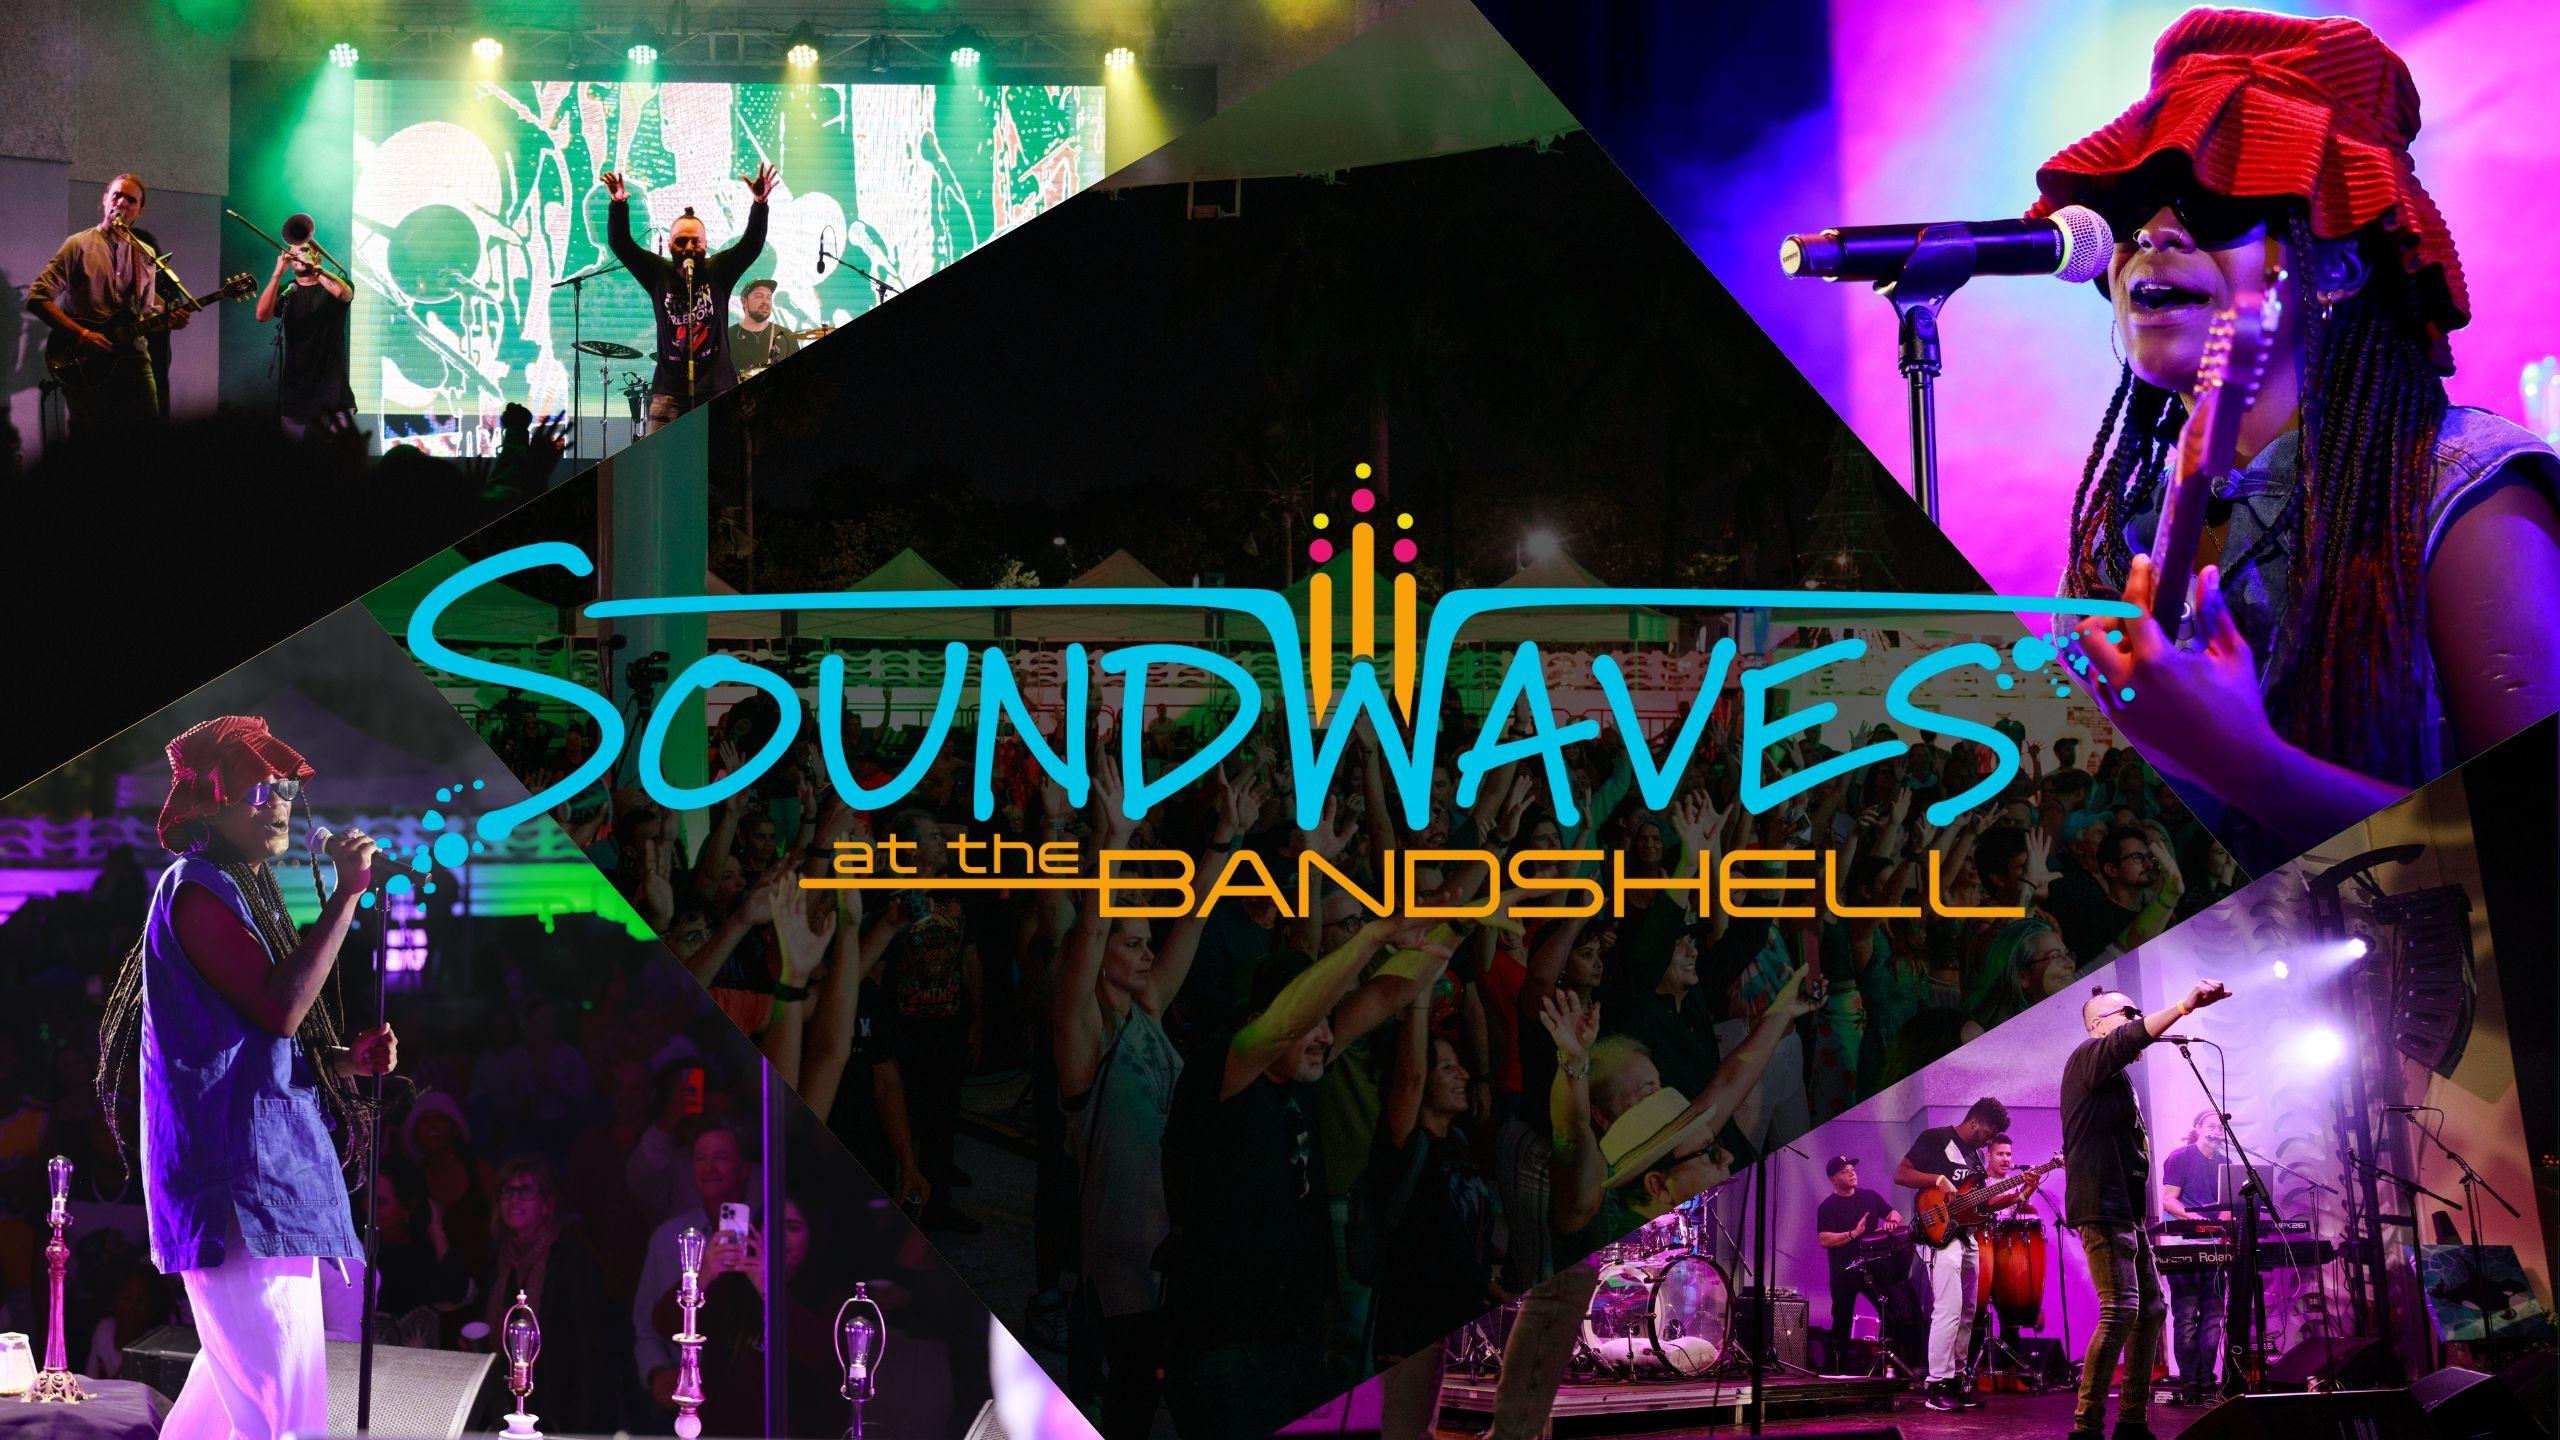 Soundwaves at the Bandshell